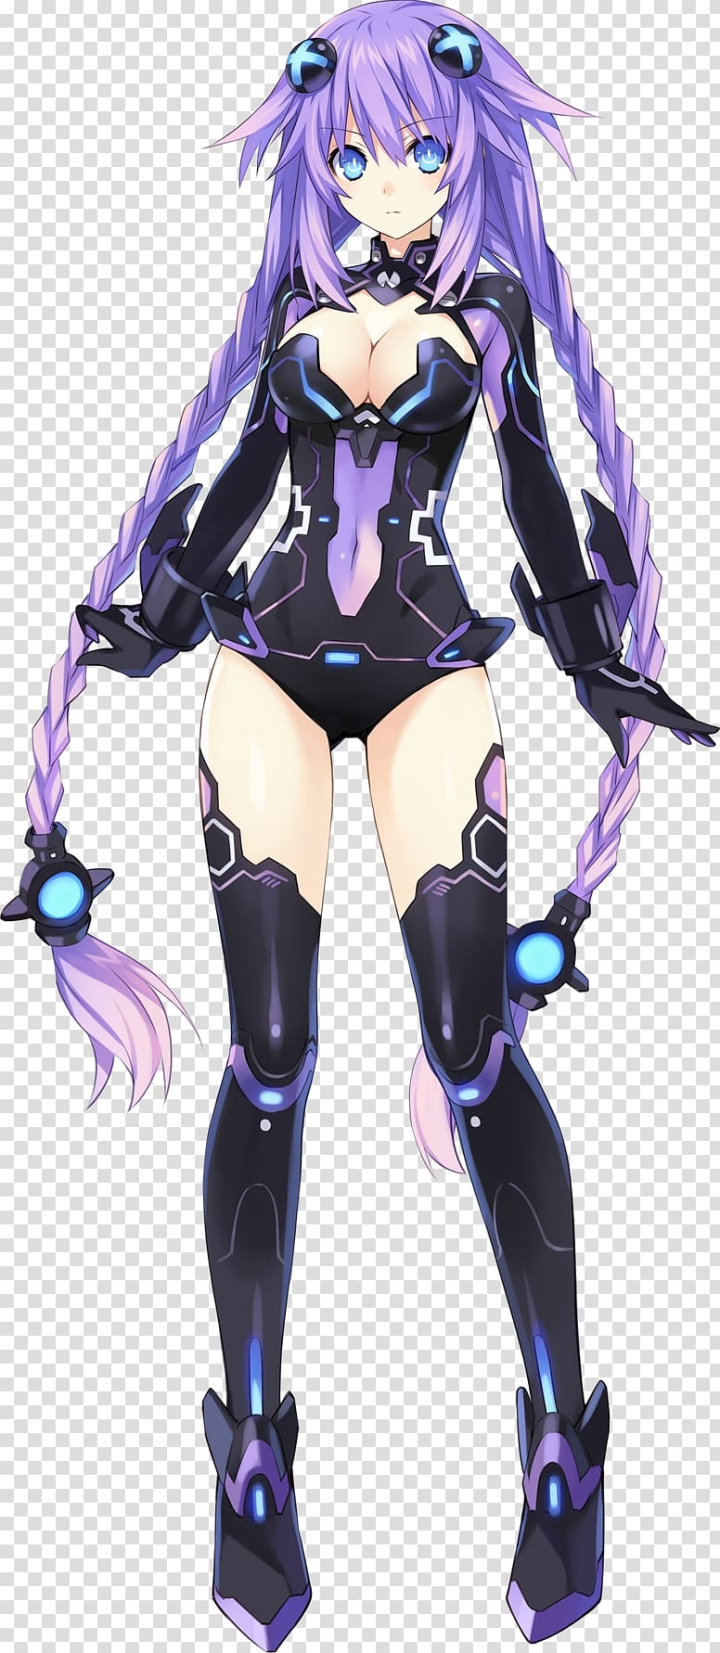 hyperdimension,neptunia,victory,mk,megadimension,vii,hyperdevotion,noire,goddess,black,heart,playstation,purple,game,black hair,manga,video game,cartoon,fictional character,latex clothing,purple heart,mangaka,playstation vita,supernatural creature,hyperdimension neptunia,anime,brown hair,character,compile heart,concept art,costume,costume design,figurine,human hair color,hyperdevotion noire goddess black heart,action figure,hyperdimension neptunia victory,hyperdimension neptunia mk2,megadimension neptunia vii,hyperdevotion noire: goddess black heart,playstation 3,png clipart,free png,transparent background,free clipart,clip art,free download,png,comhiclipart